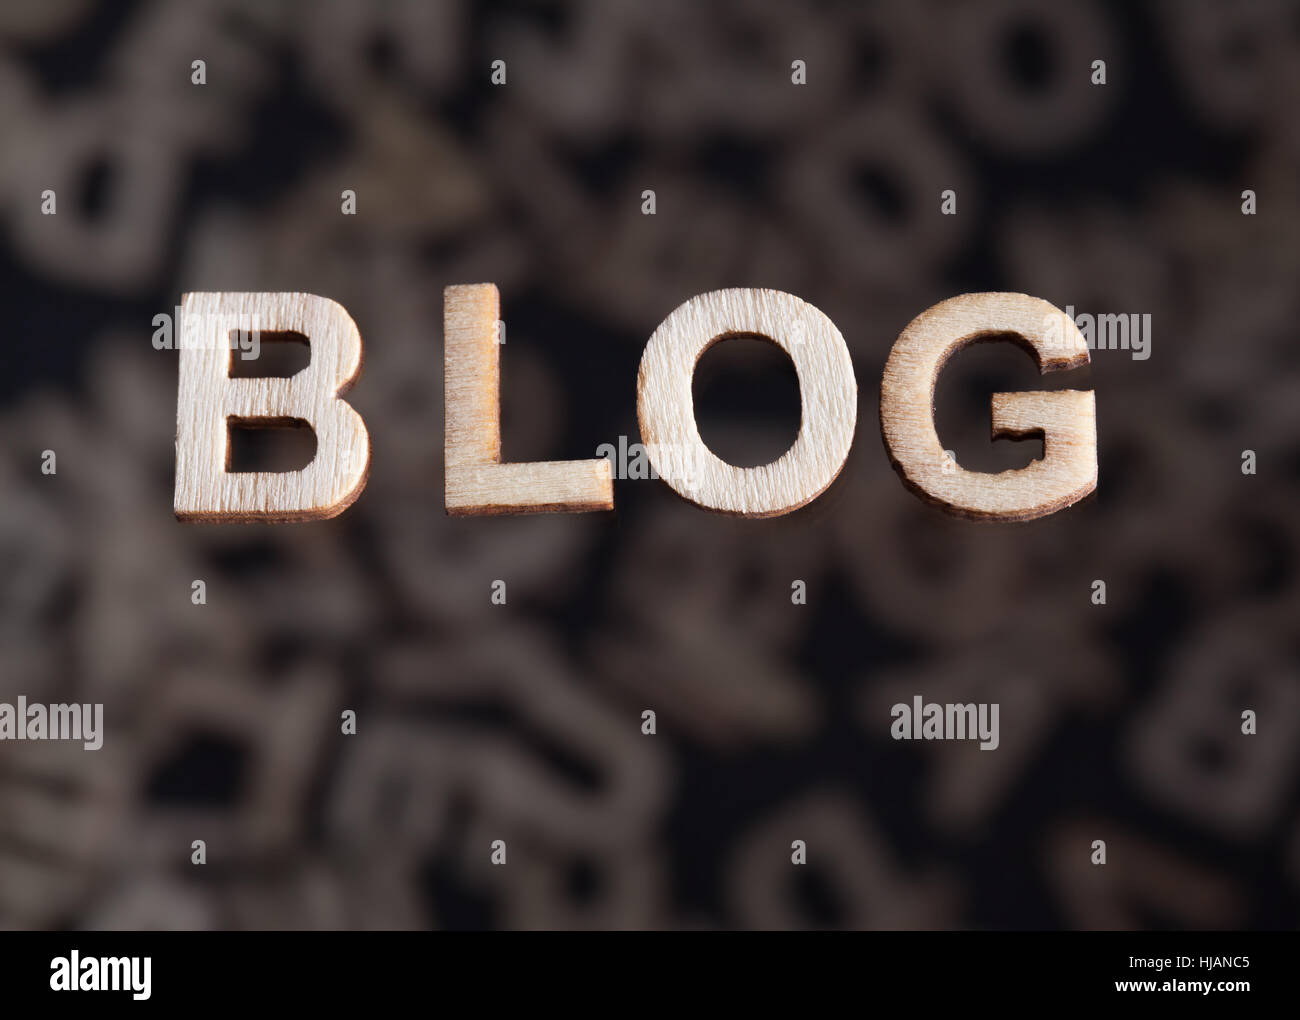 Blog wooden letters text created in wood floating above random letters below out of focus on a black background Stock Photo